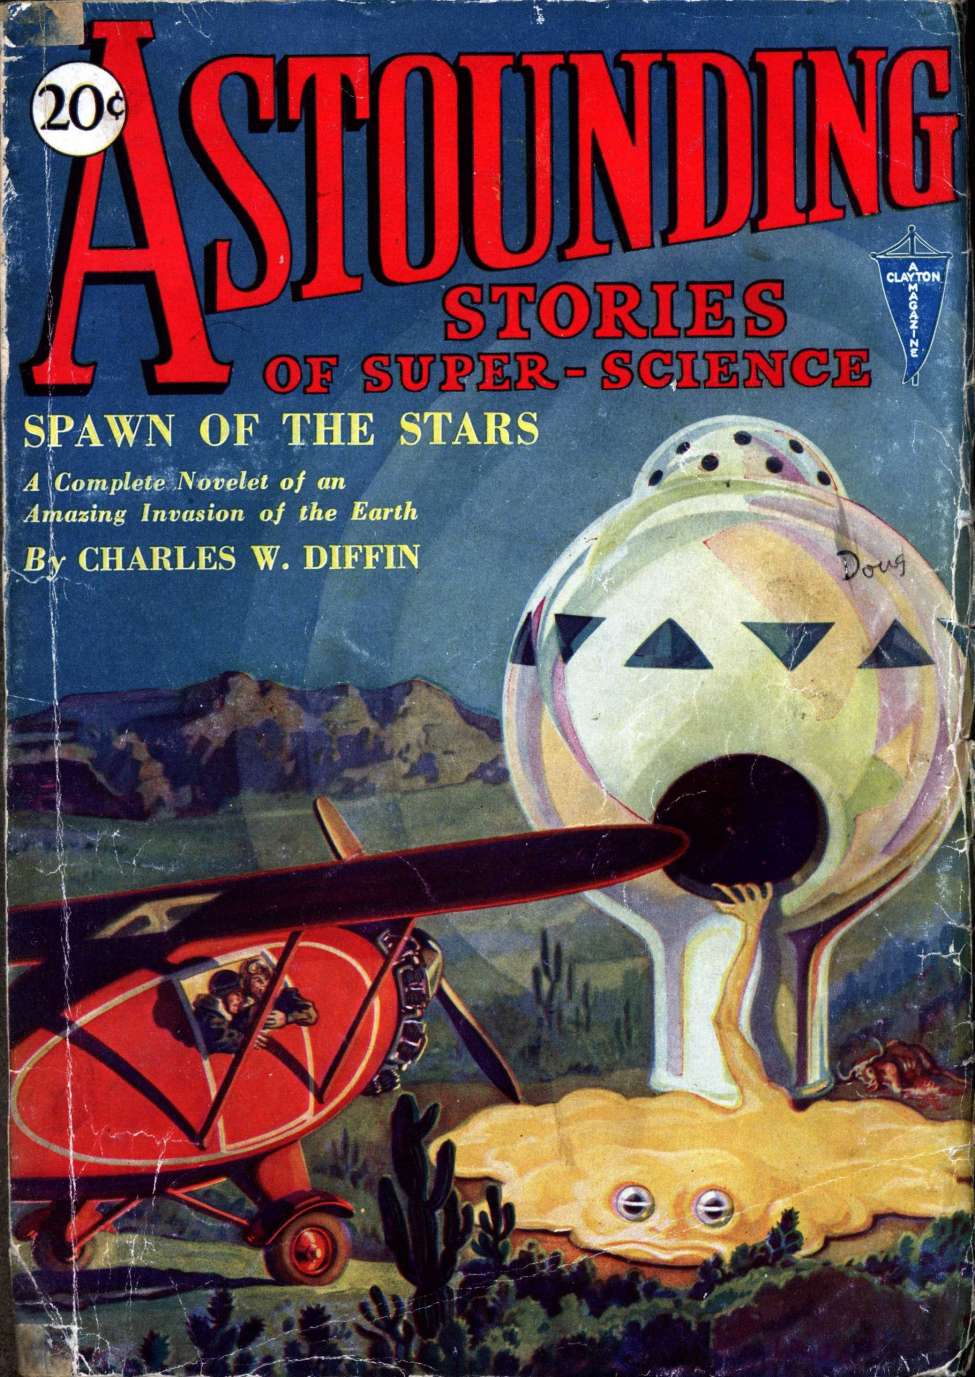 Comic Book Cover For Astounding v1 2 - Spawn of the Stars - Charles W. Diffin